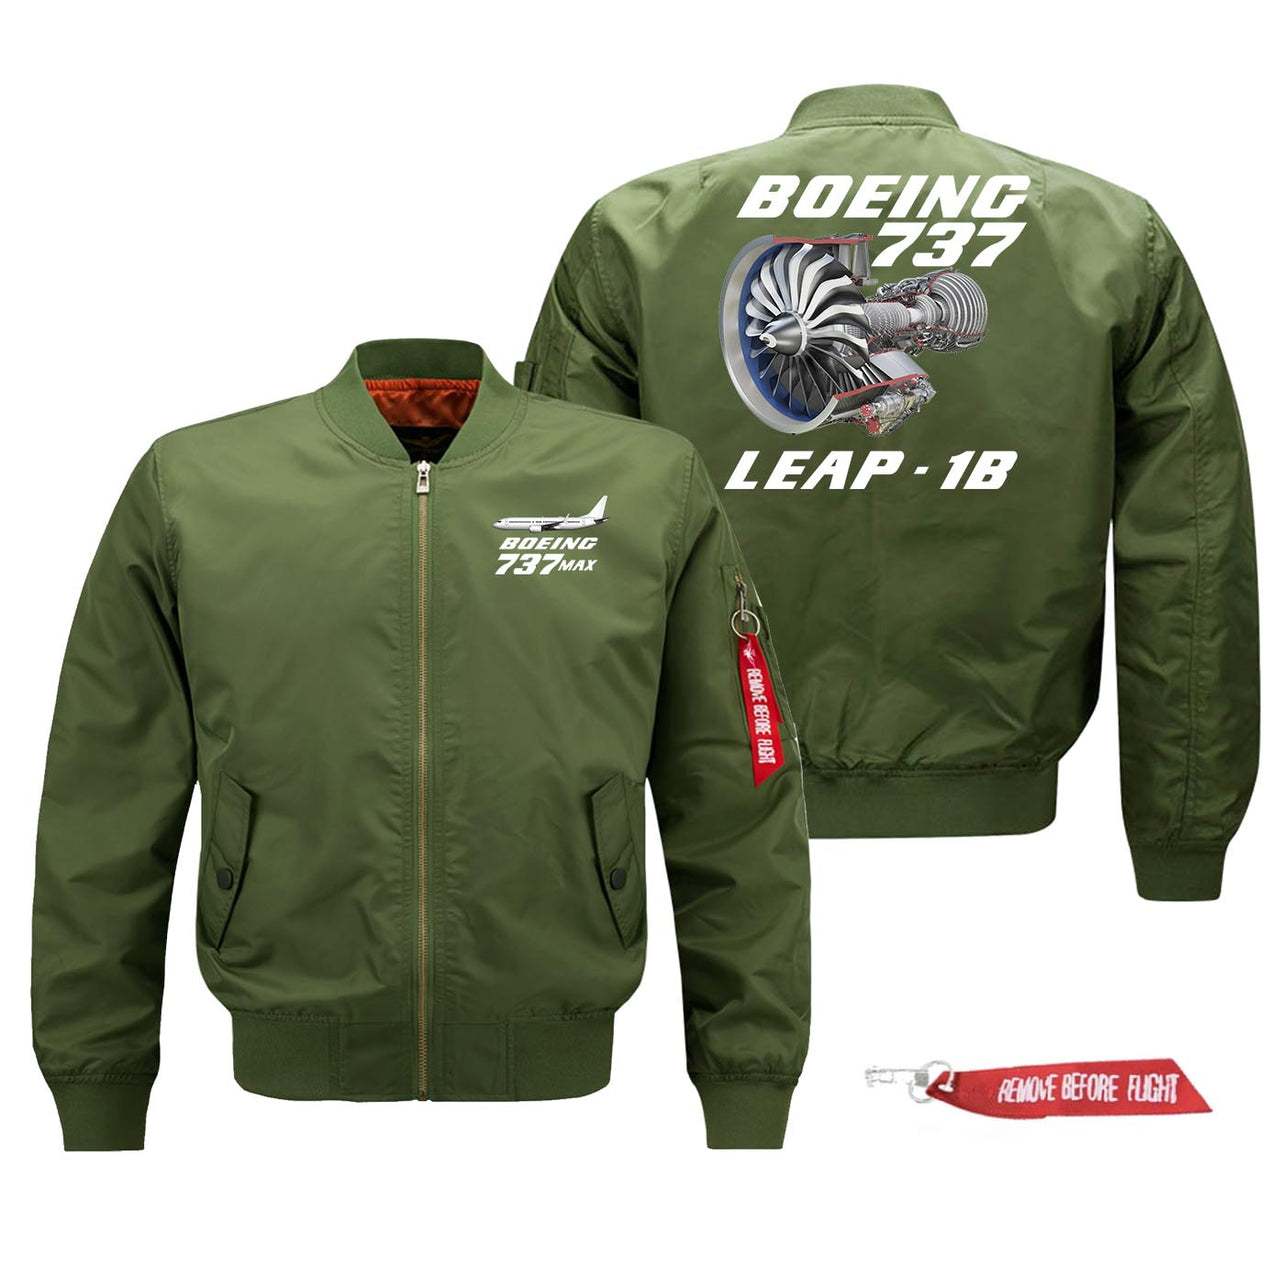 The Boeing 737Max & Leap 1B Designed Pilot Jackets (Customizable)